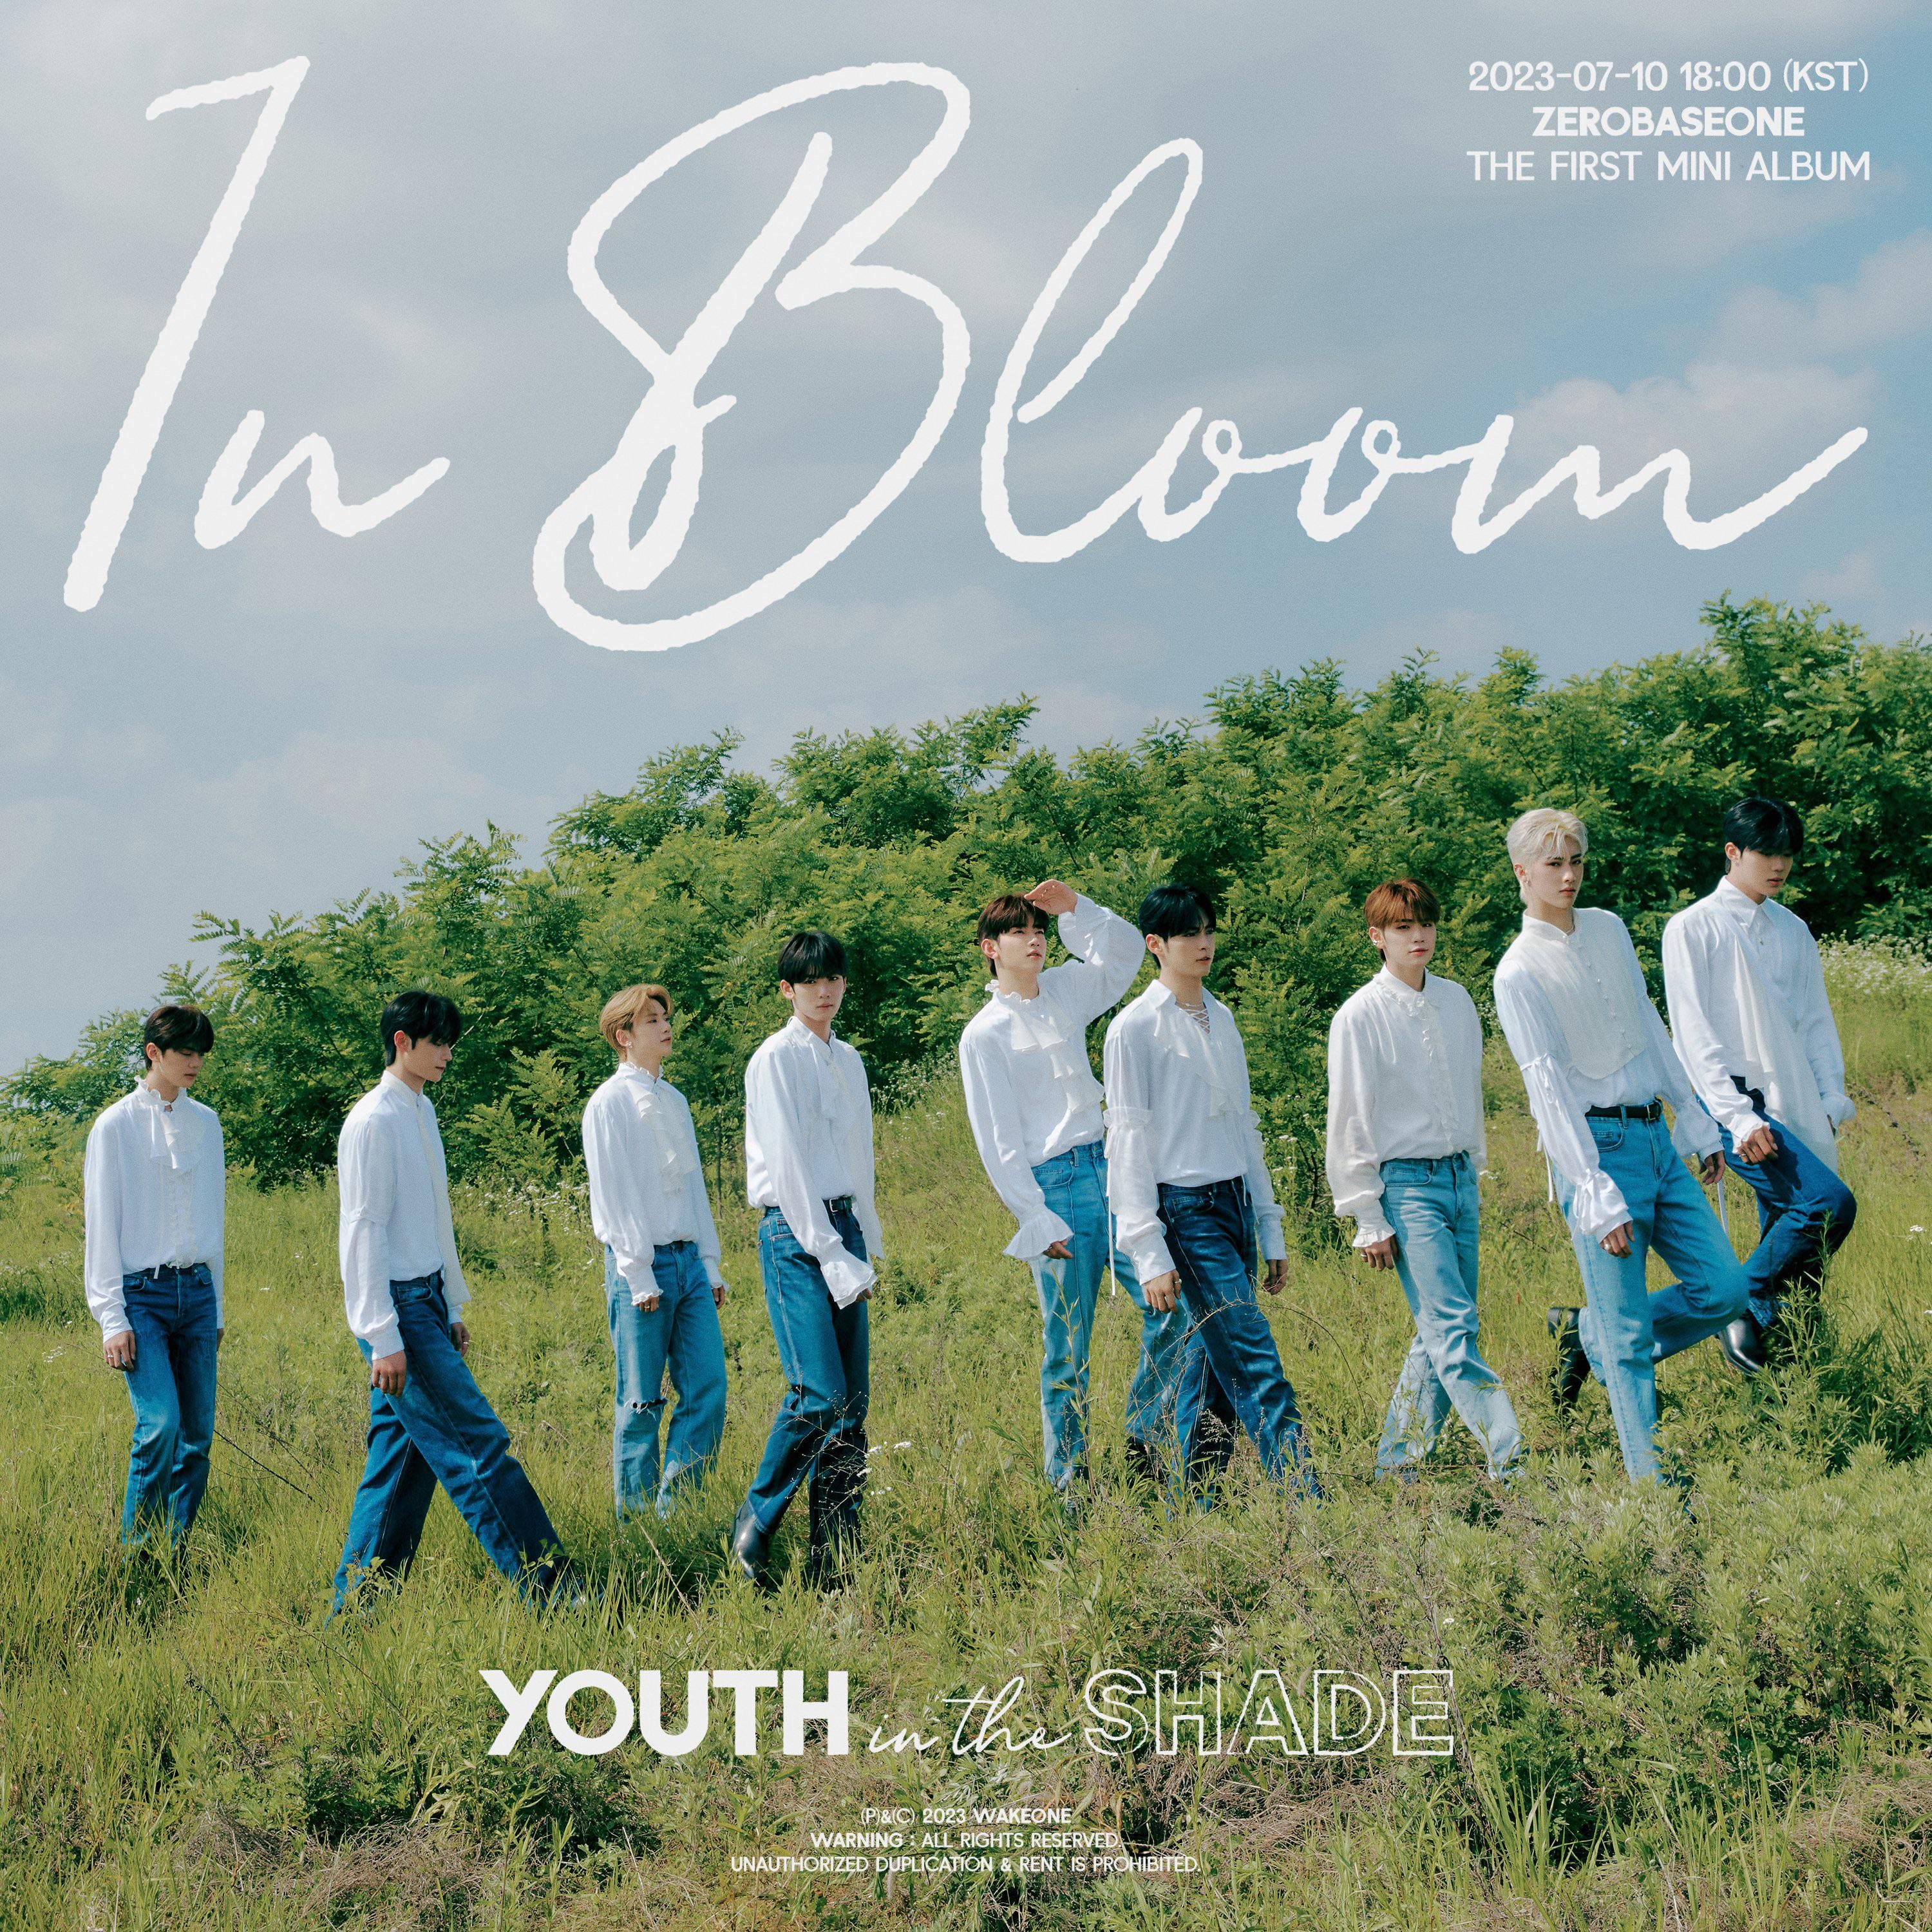 ZEROBASEONE Debut Album “YOUTH in the SHADE” Concept Photo